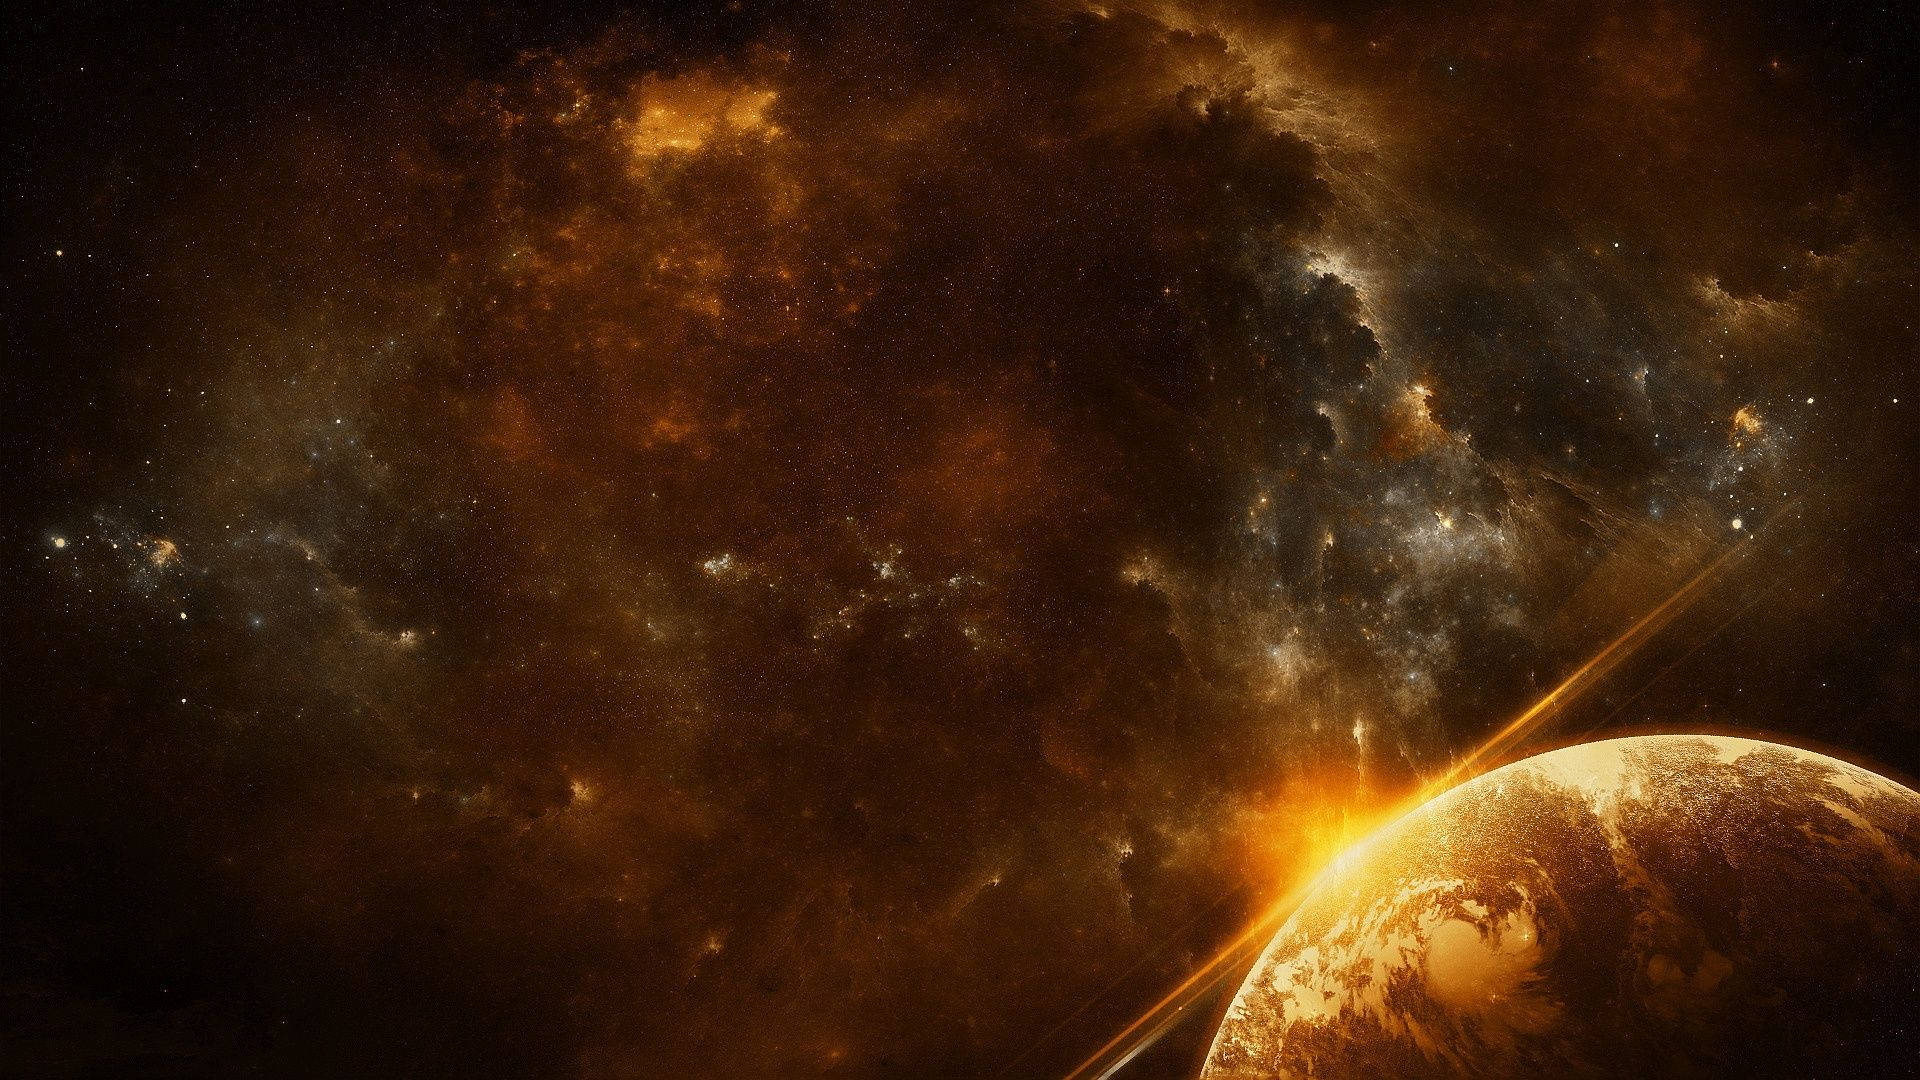 Free Planet Wallpaper Downloads, [600+] Planet Wallpapers for FREE |  